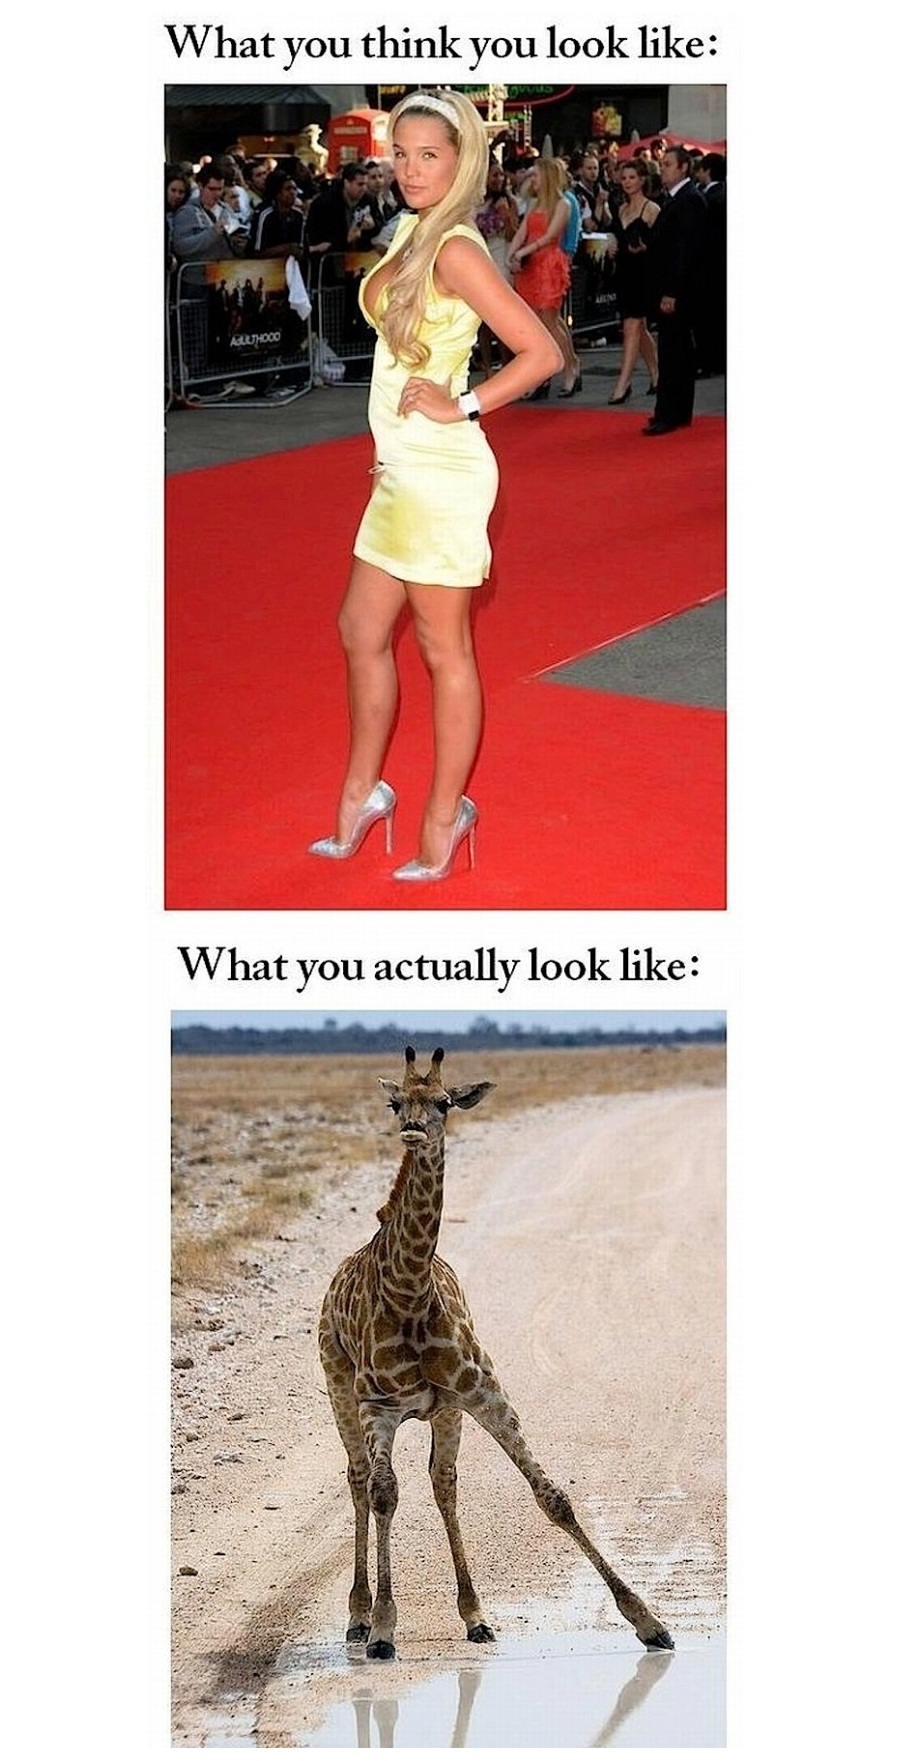 What you Think and what you actually look like